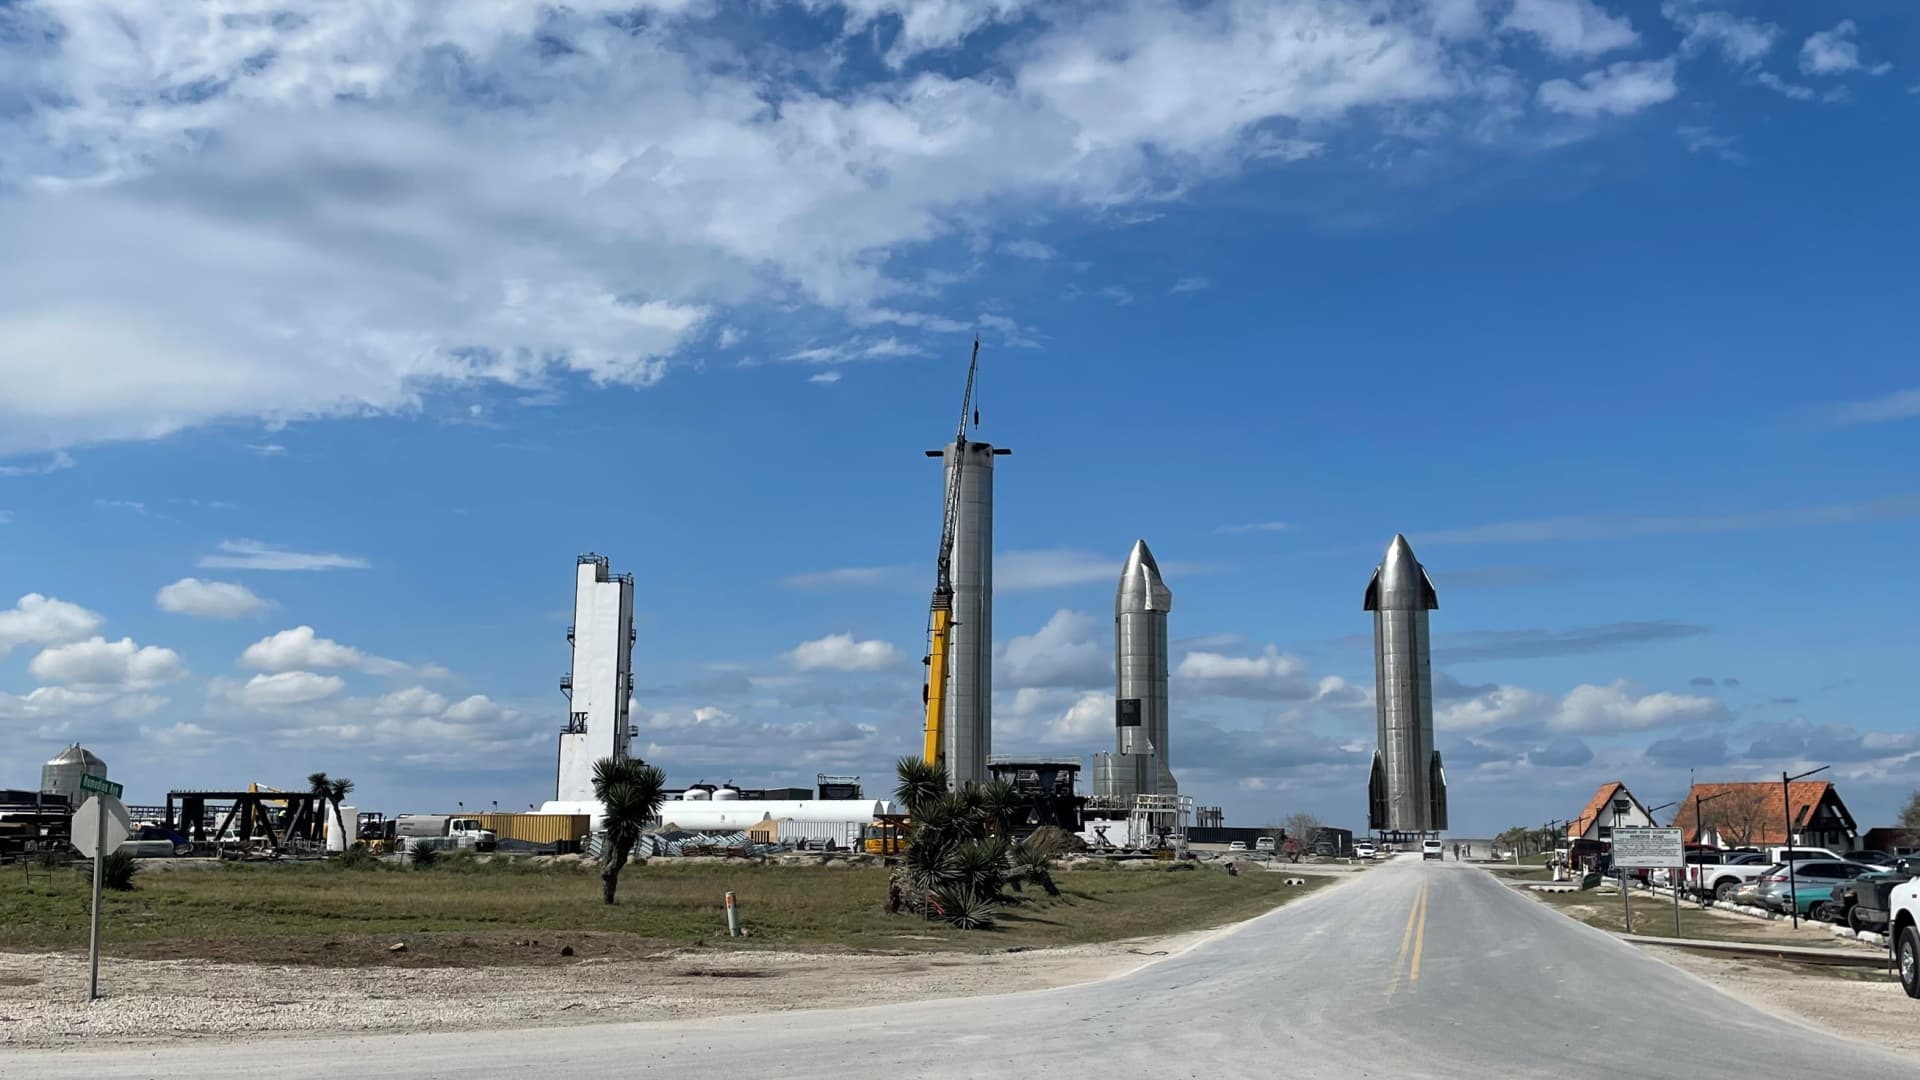 SpaceX's Starbase facility in Boca Chica, Texas.